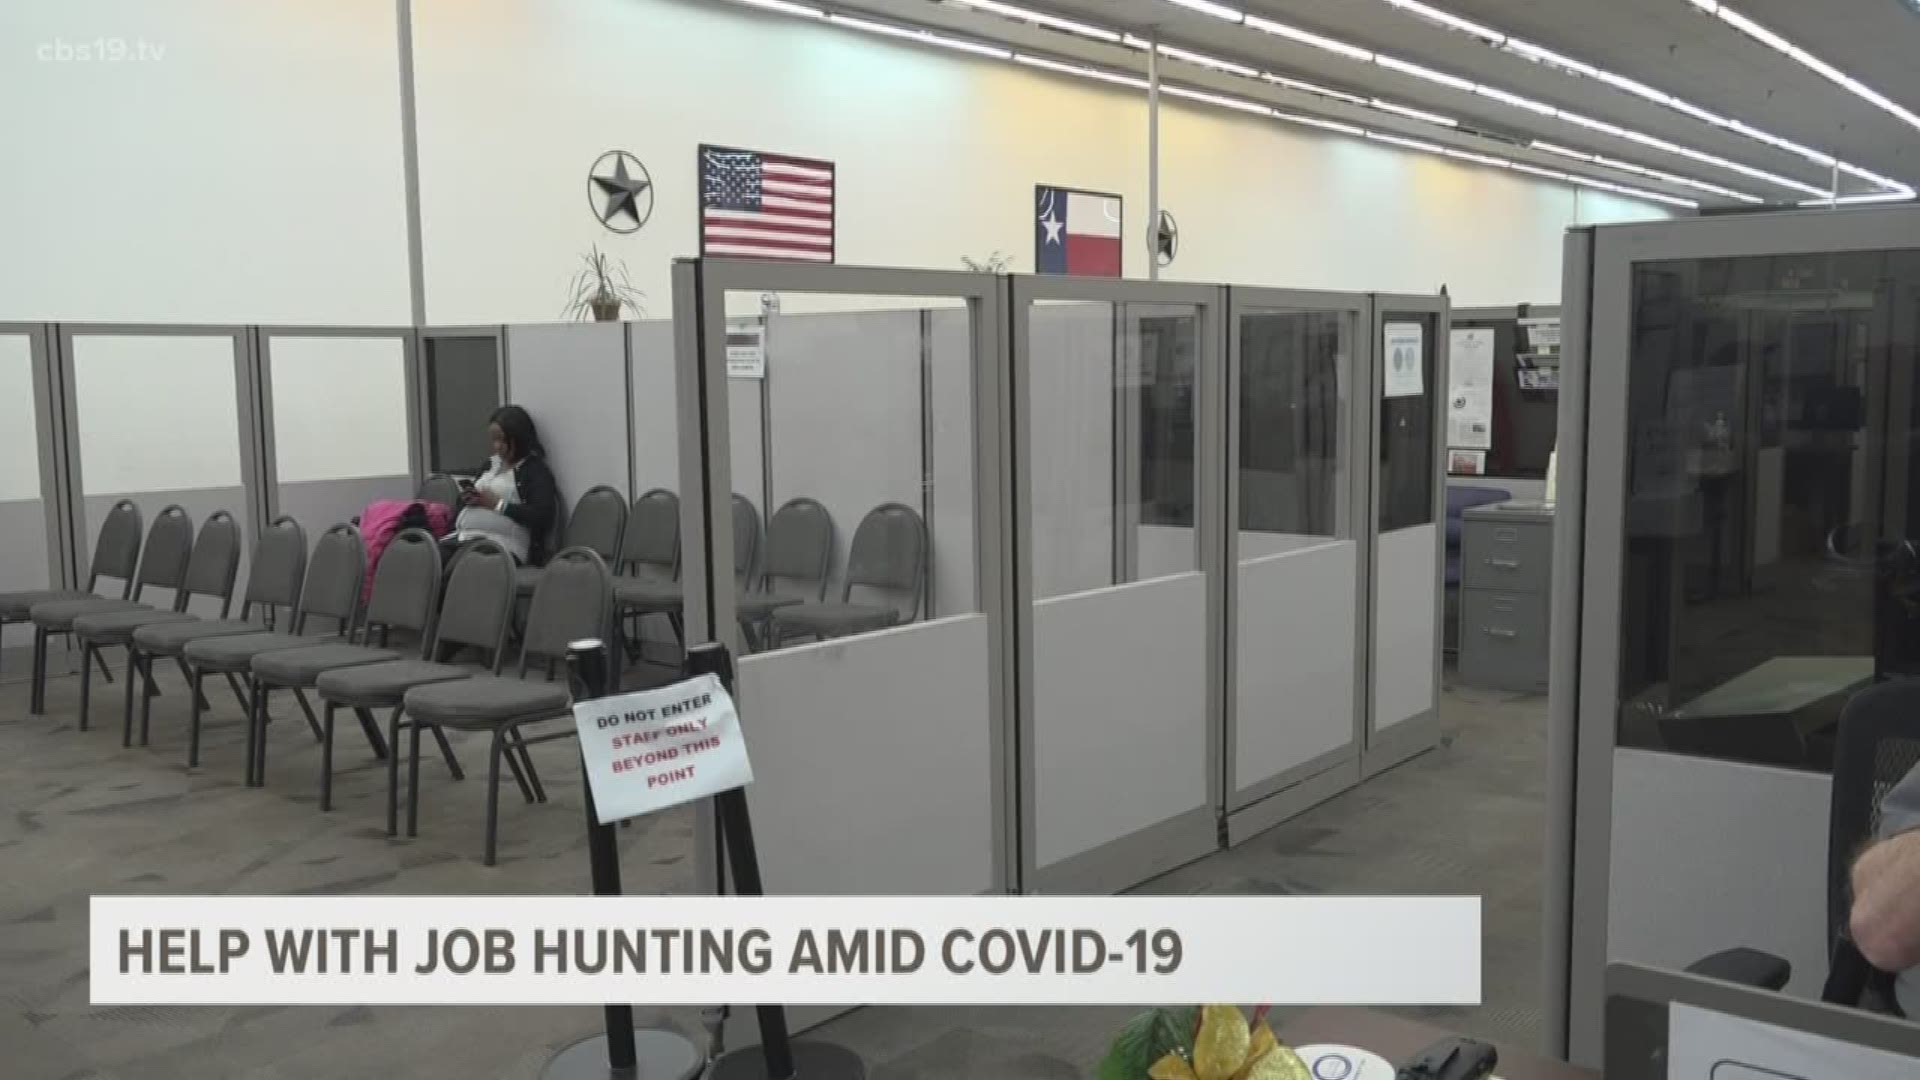 Agencies in East Texas are lending a hand to help those seeking a job amid COVID-19.